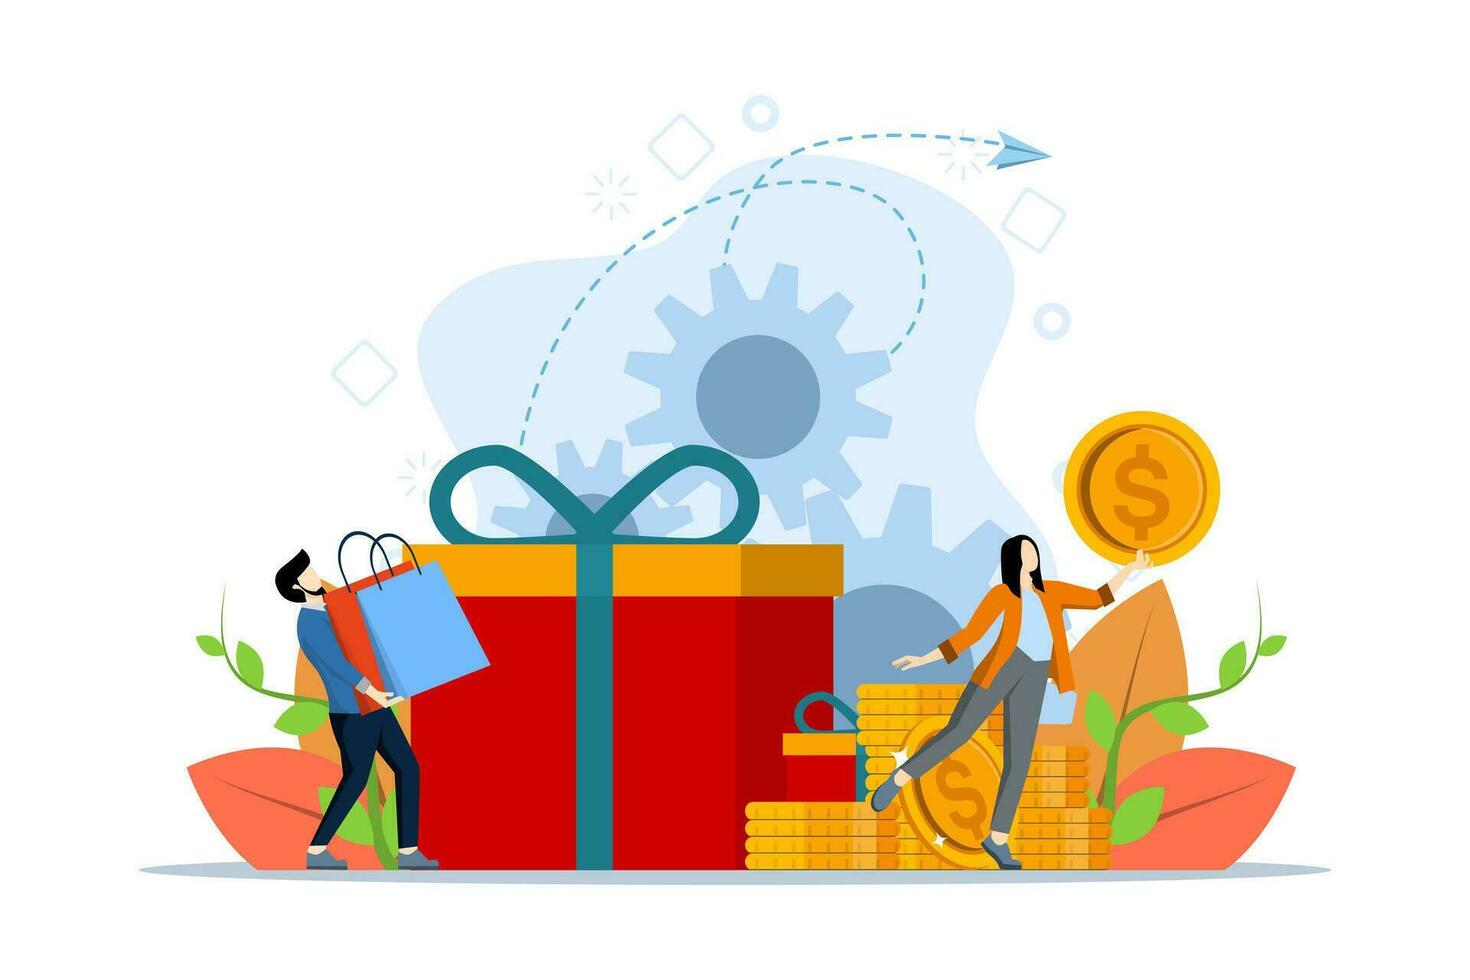 personalized sale concept with tiny people. B2B marketing, sales representative, telemarketing vector illustration. Digital campaign, sales agent, brand representative, company metaphor.